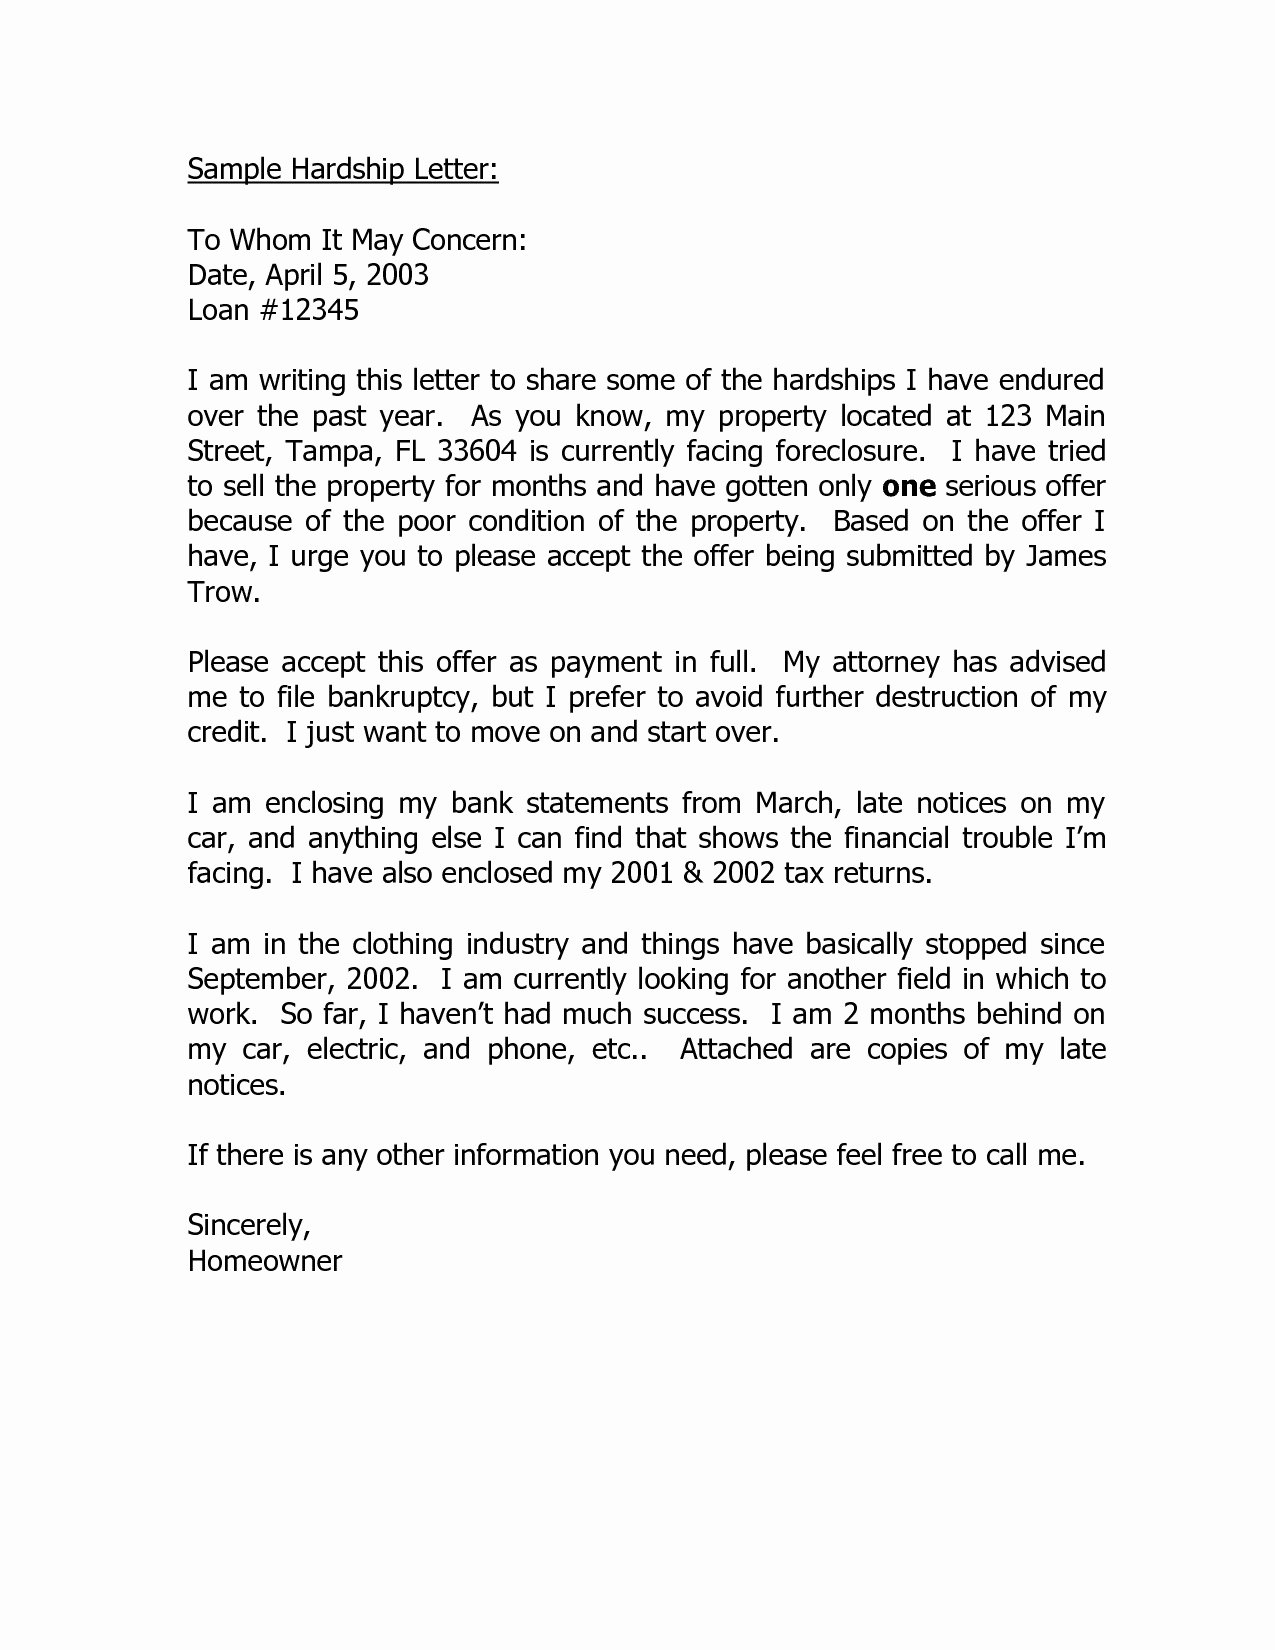 Personal Letter format Examples Awesome Personal Letter format to whom It May Concern